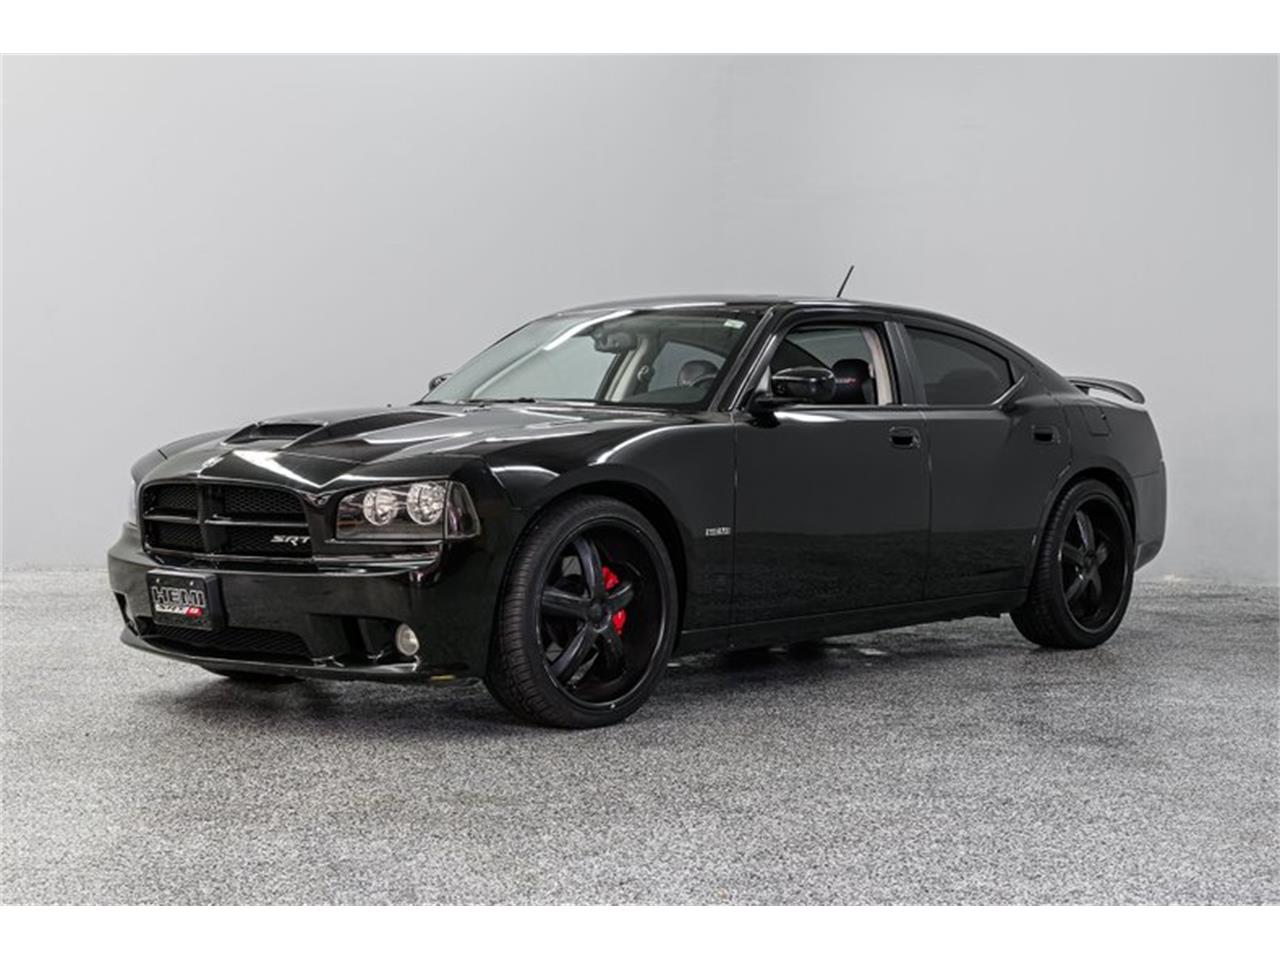 for sale 2008 dodge charger in concord, north carolina cars - concord, nc at geebo